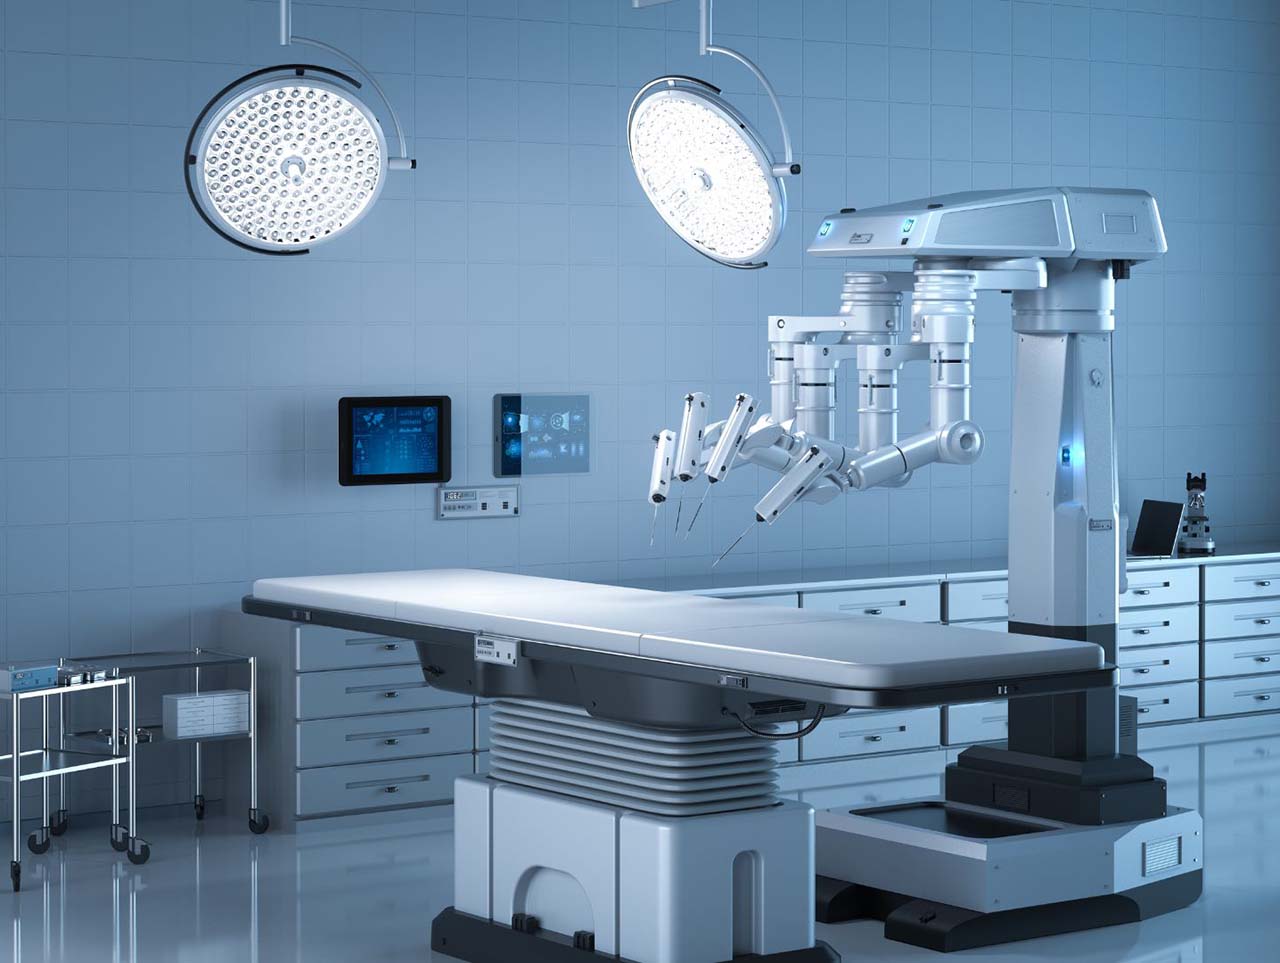 The advanced robotic surgery technology the robotic surgeon at SCMSC in Los Angeles use to treat stomach cancer.